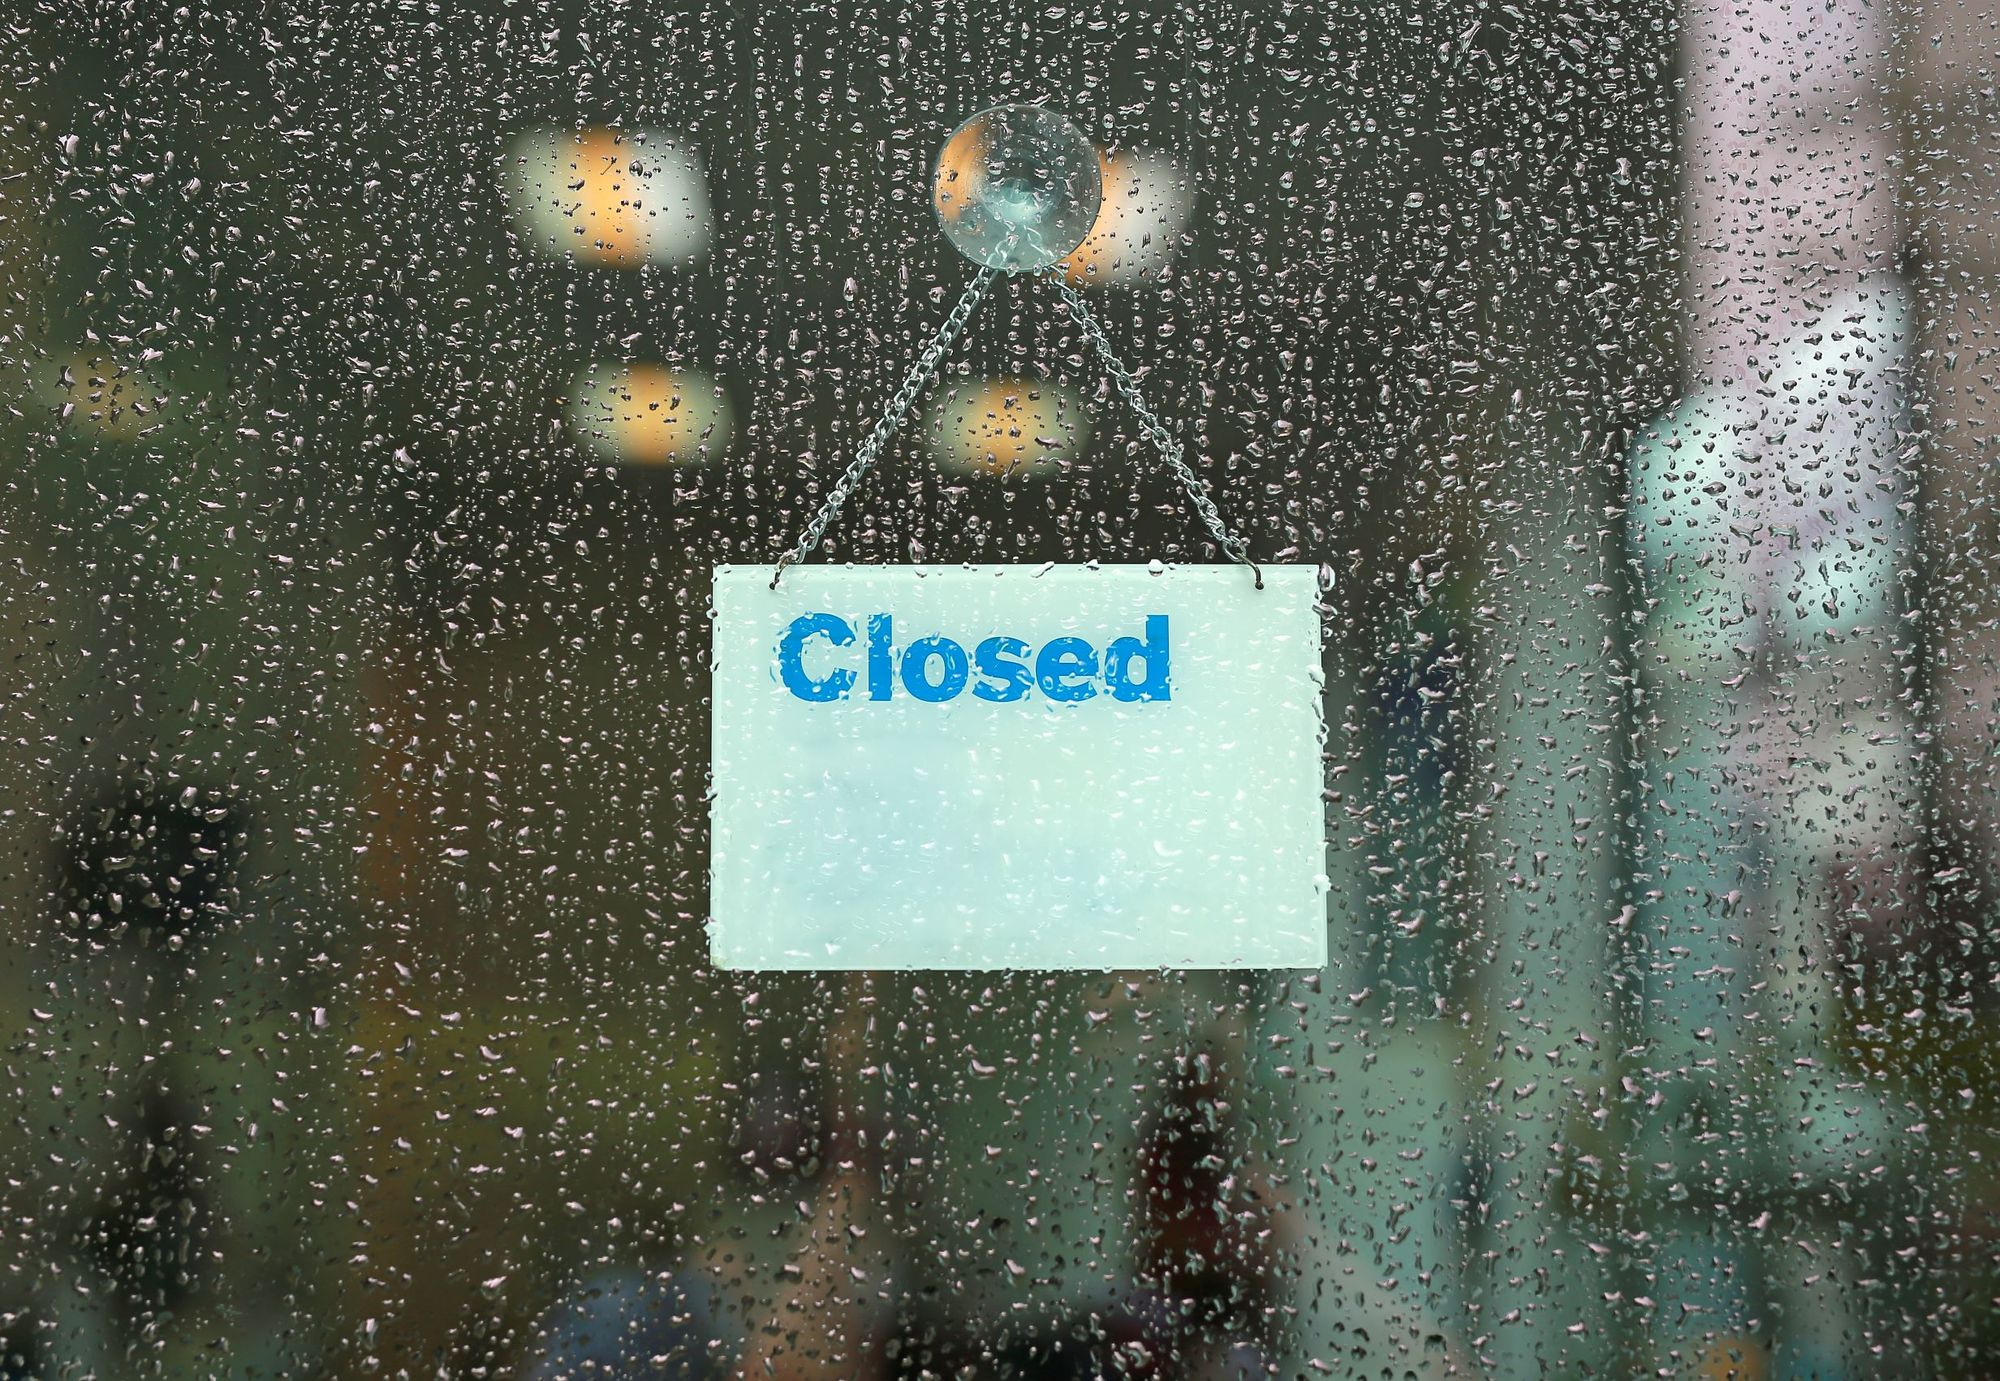 A shop window covered in rain drops with a closed sign